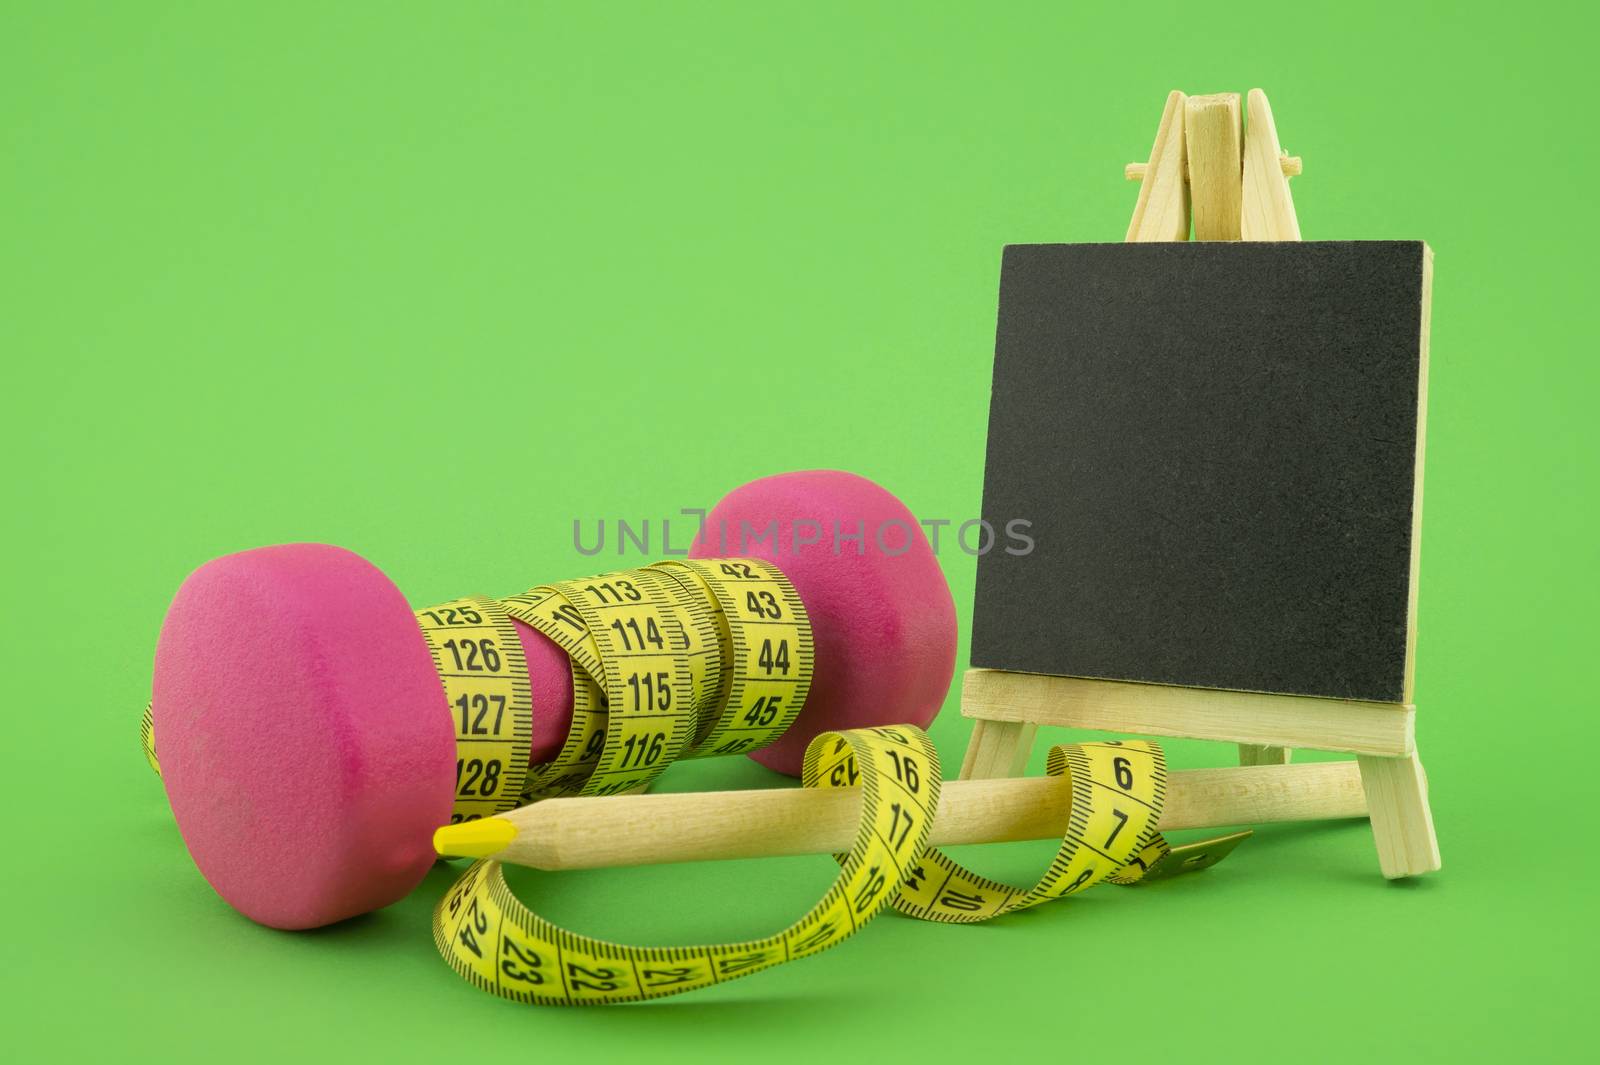 Starting healthy lifestyle concept. Still life with pink dumbbell, measuring tape, chalkboard and pencil on green background